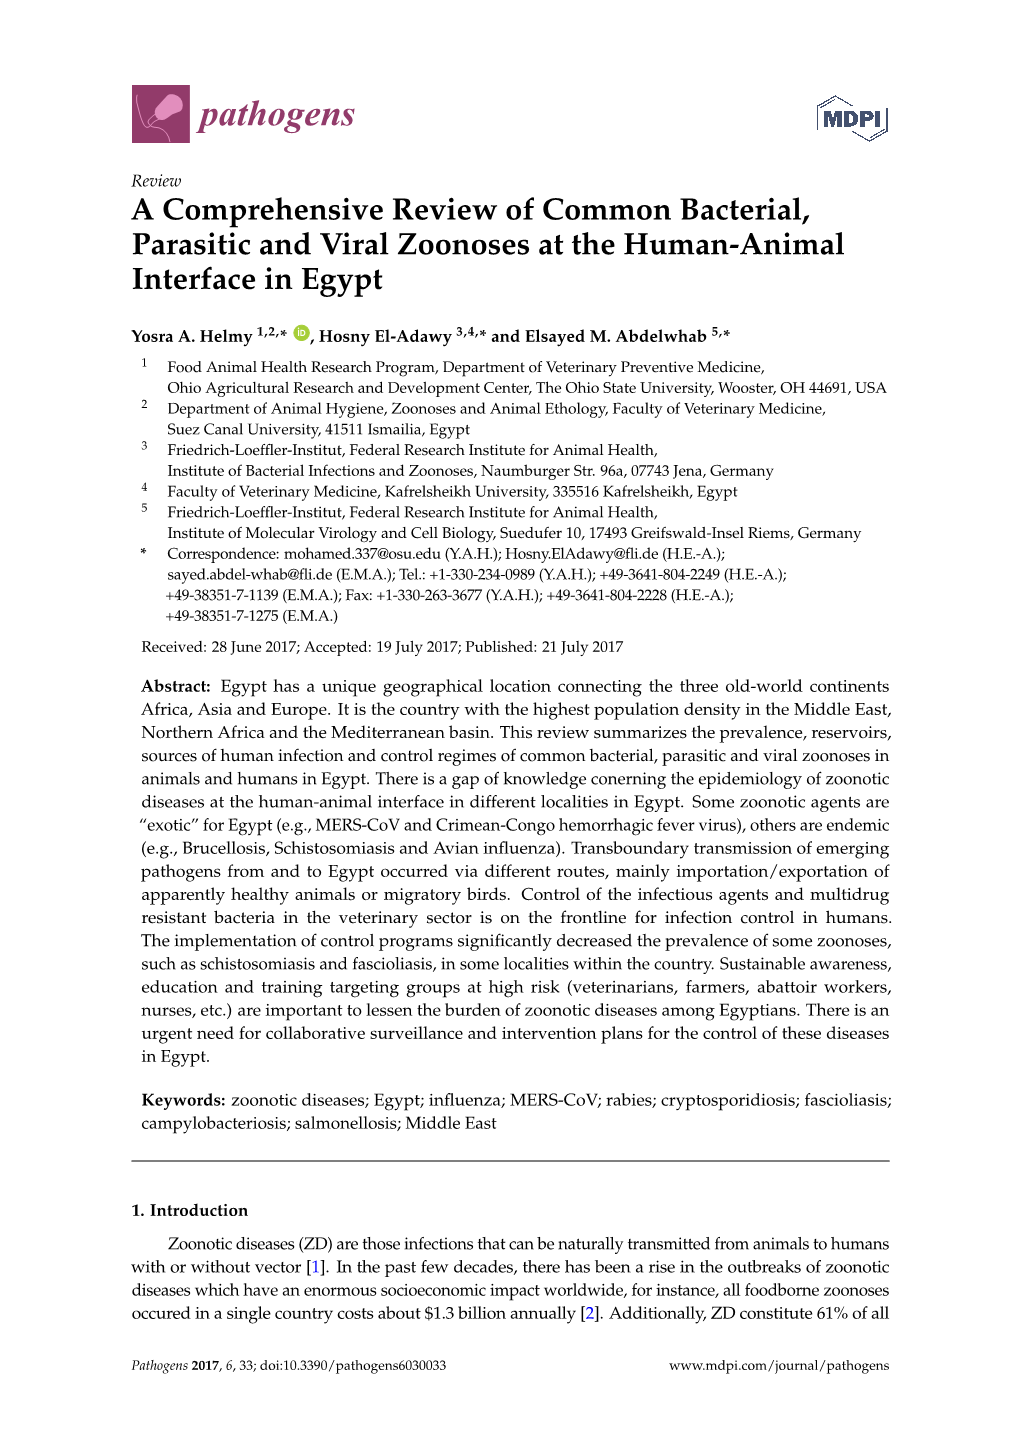 A Comprehensive Review of Common Bacterial, Parasitic and Viral Zoonoses at the Human-Animal Interface in Egypt